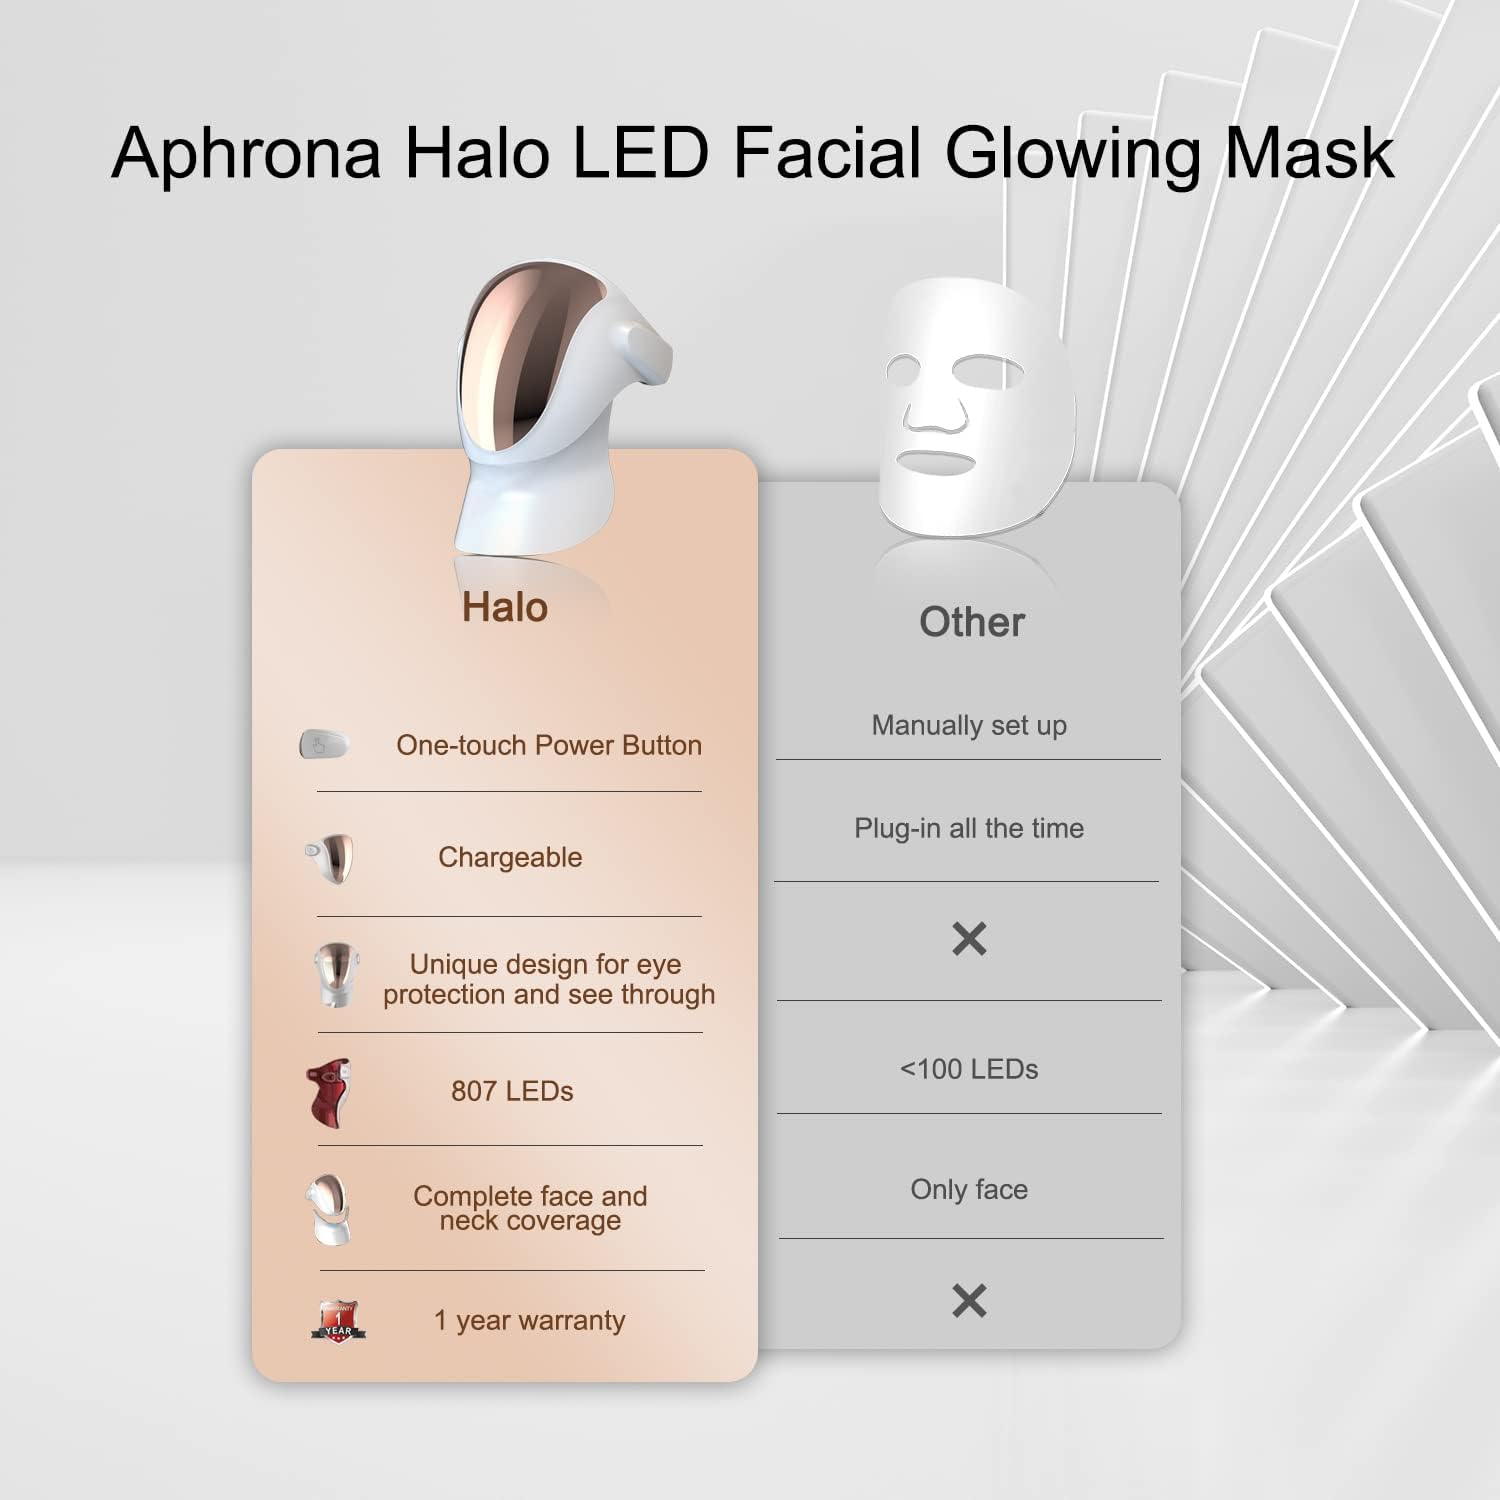 Aphrona Led Face Mask Light Therapy, Halo Led Light Therapy Facial and Neck Skin Care Mask, Blue Light Red Light for Acne Wrinkle Reduce, New Generation Face and Neck Photon Mask